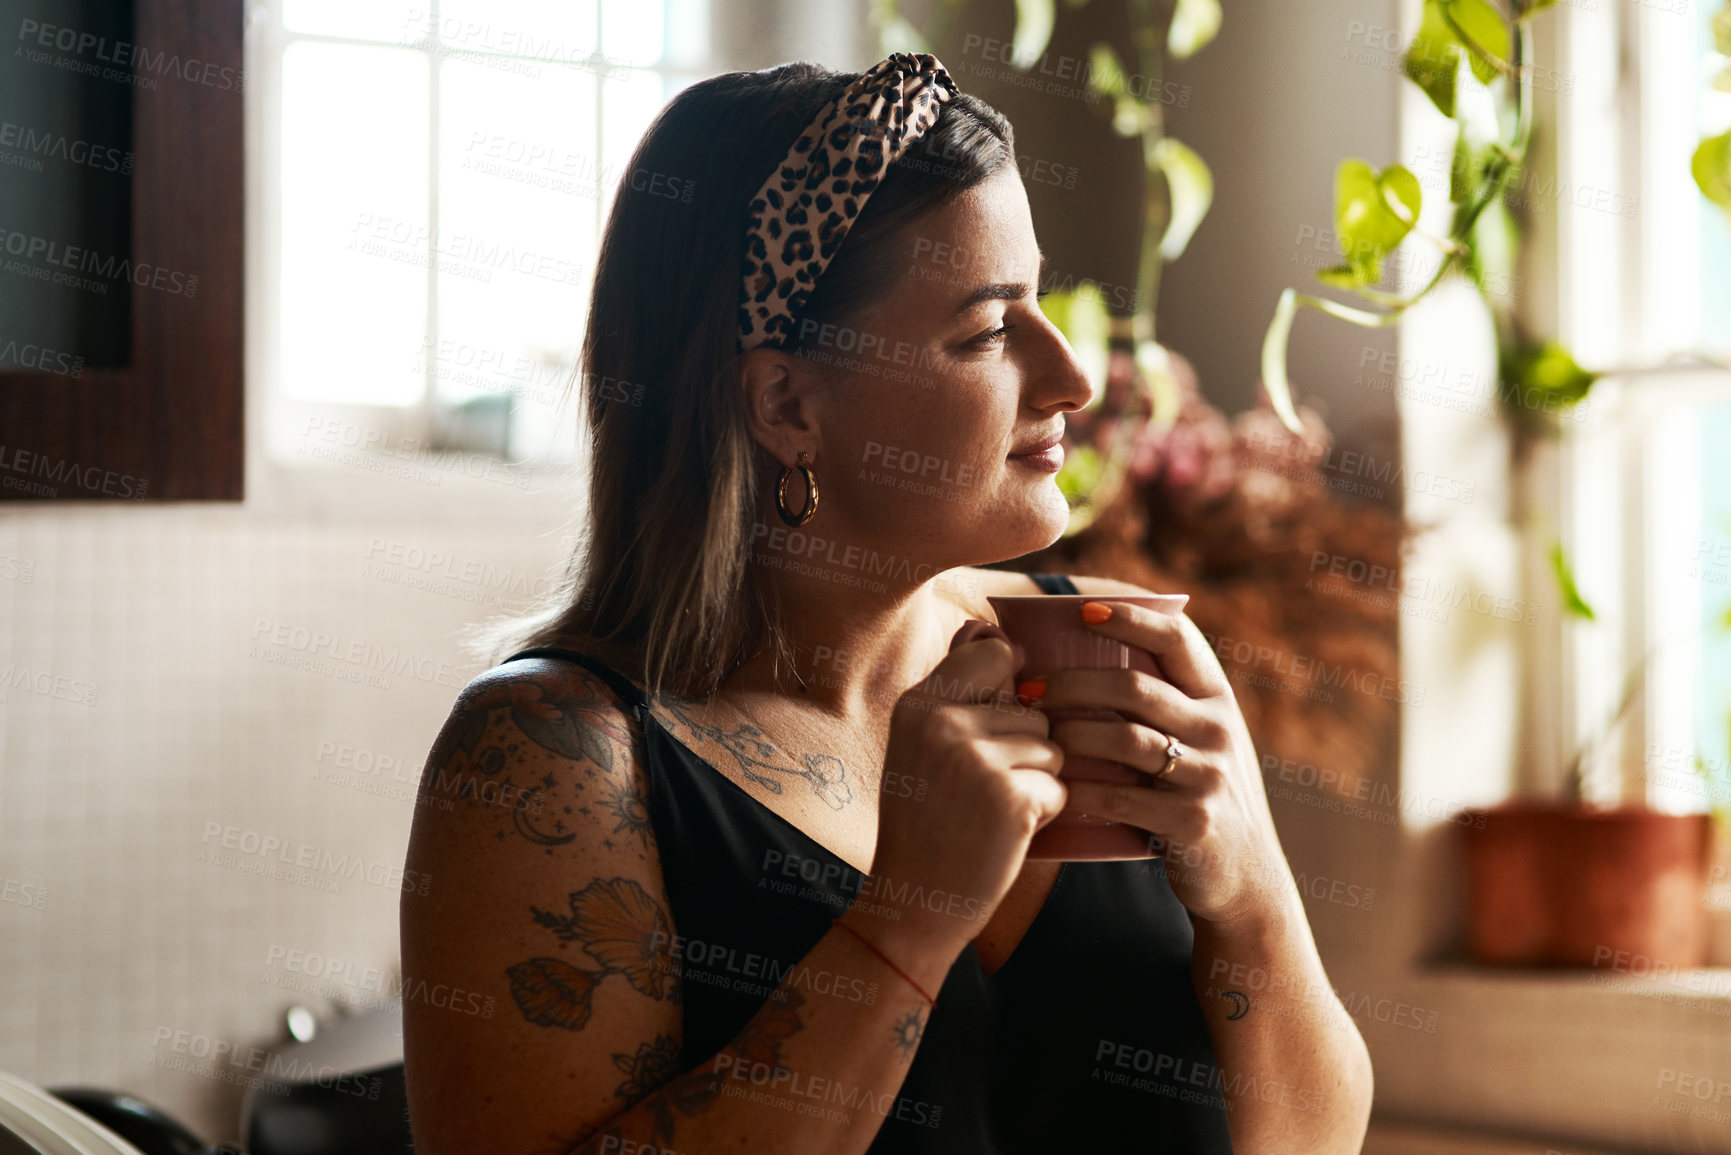 Buy stock photo Shot of a young woman having a relaxing coffee break at home